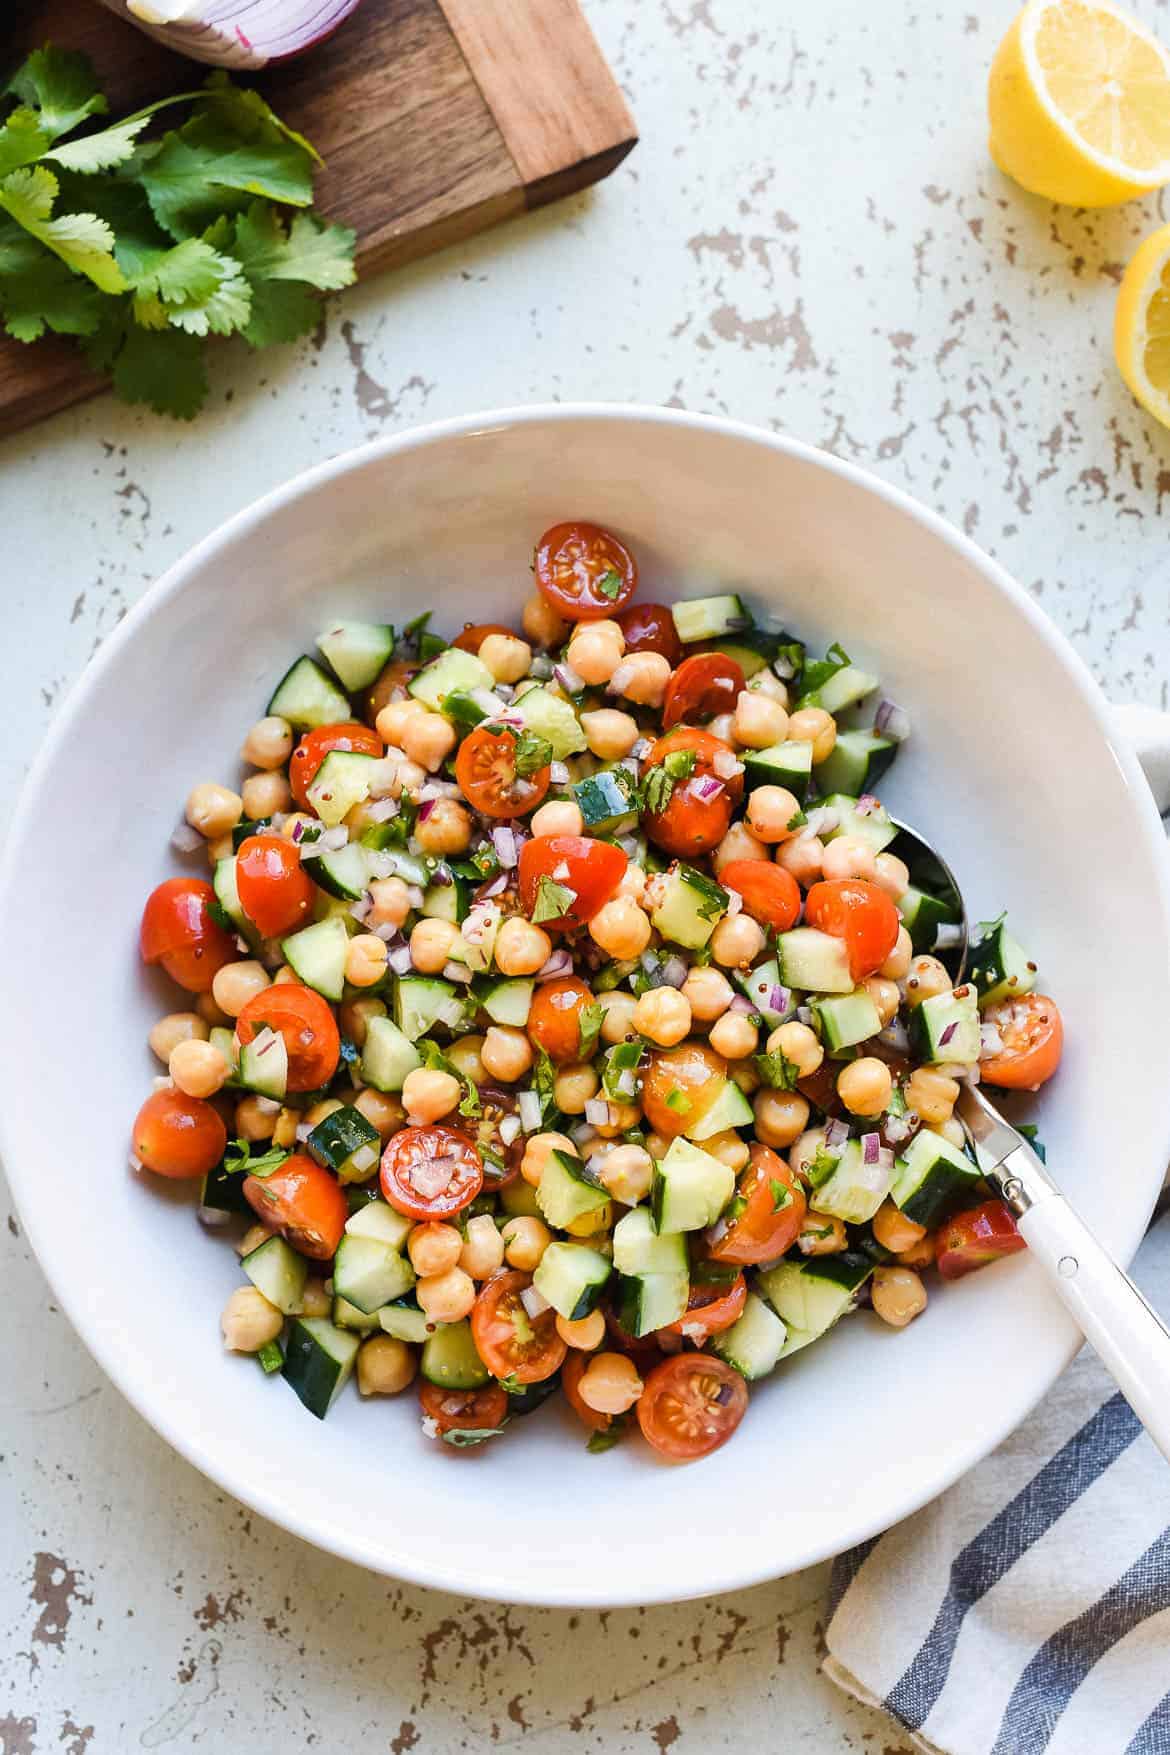 Chickpea Salad with tomatoes and cucumbers in a white bowl on a light background